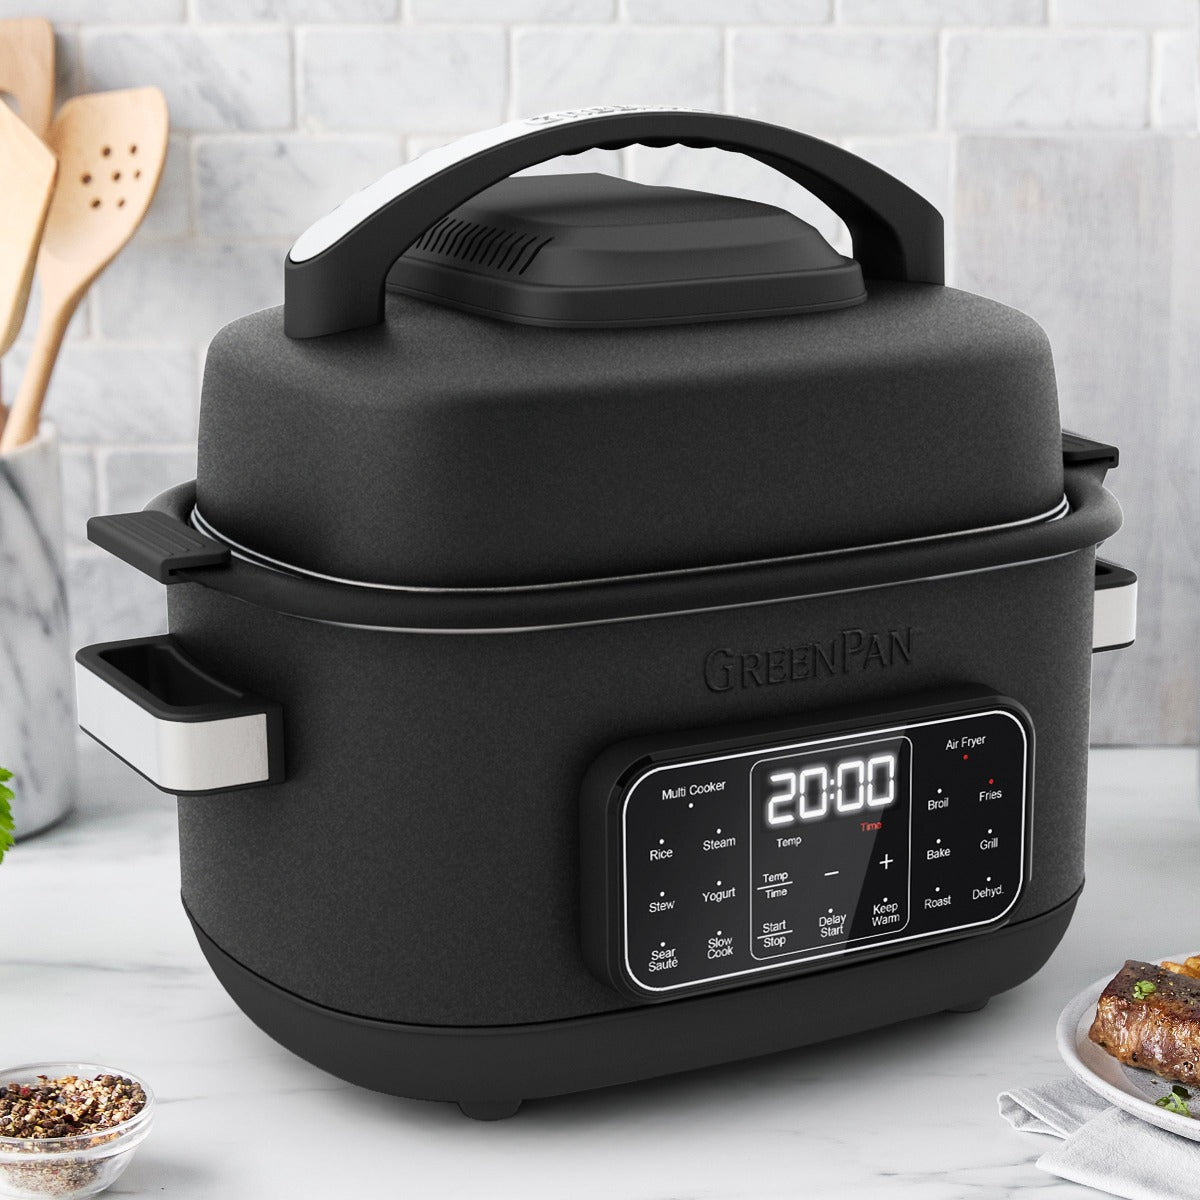 13-in-1 Air Fryer: Cook Everything in One Instant Pot 